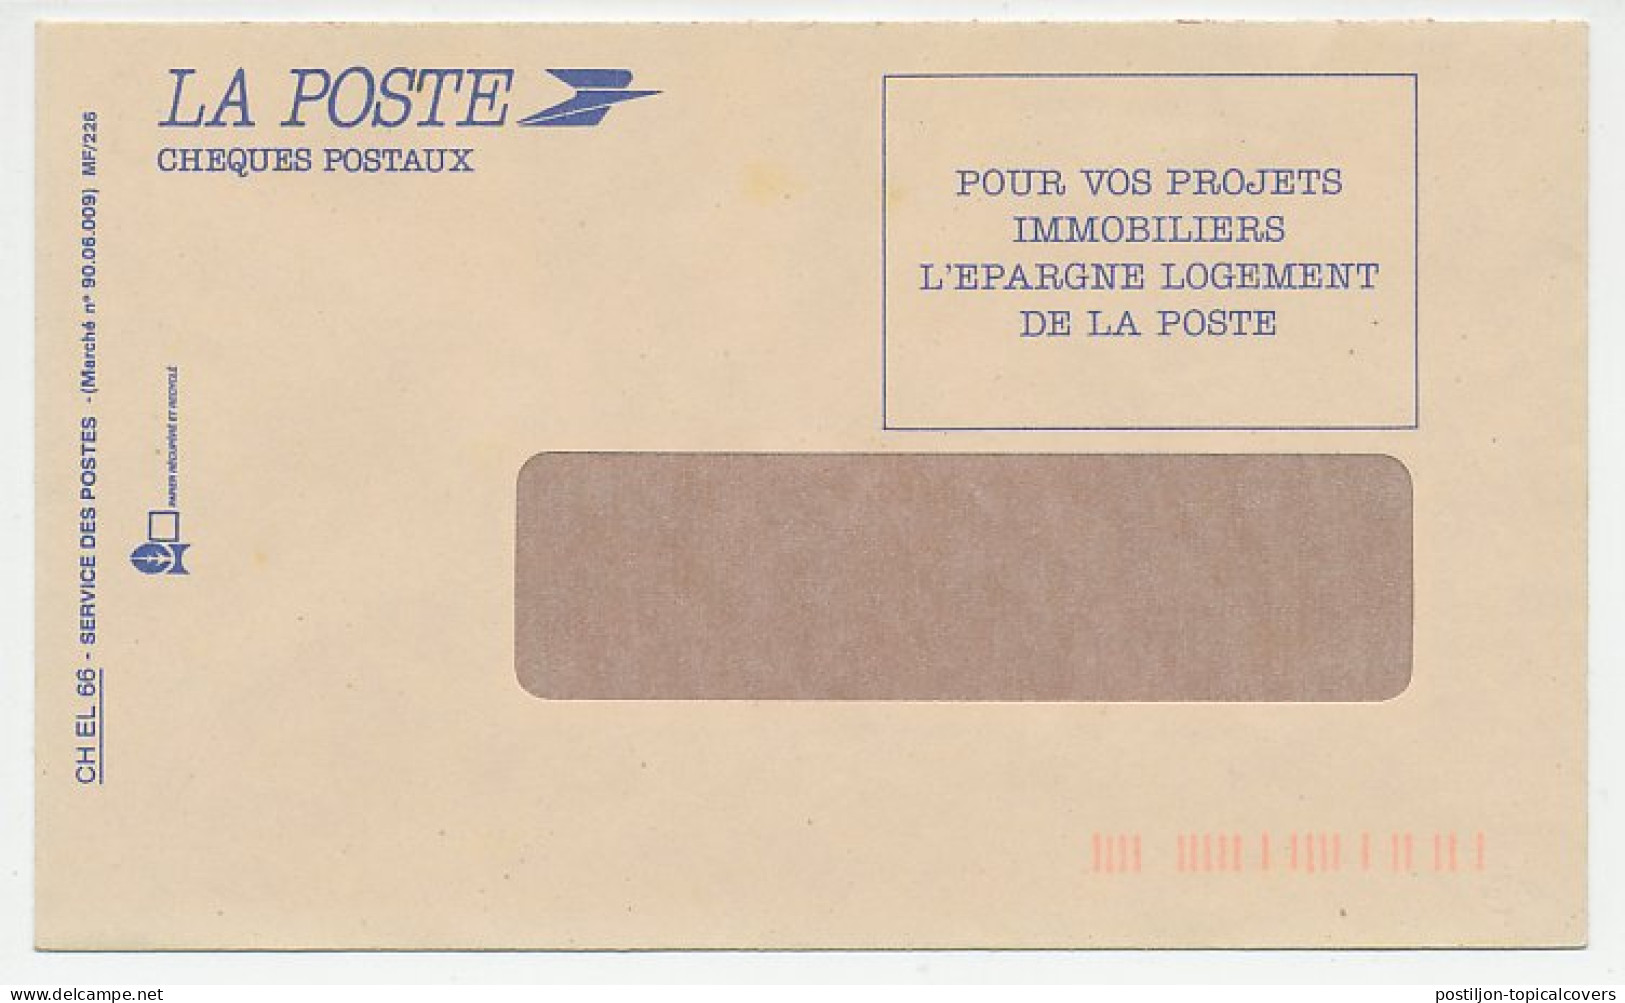 Postal Cheque Cover France 1990 Humidity - Mold - Isolation - Ohne Zuordnung